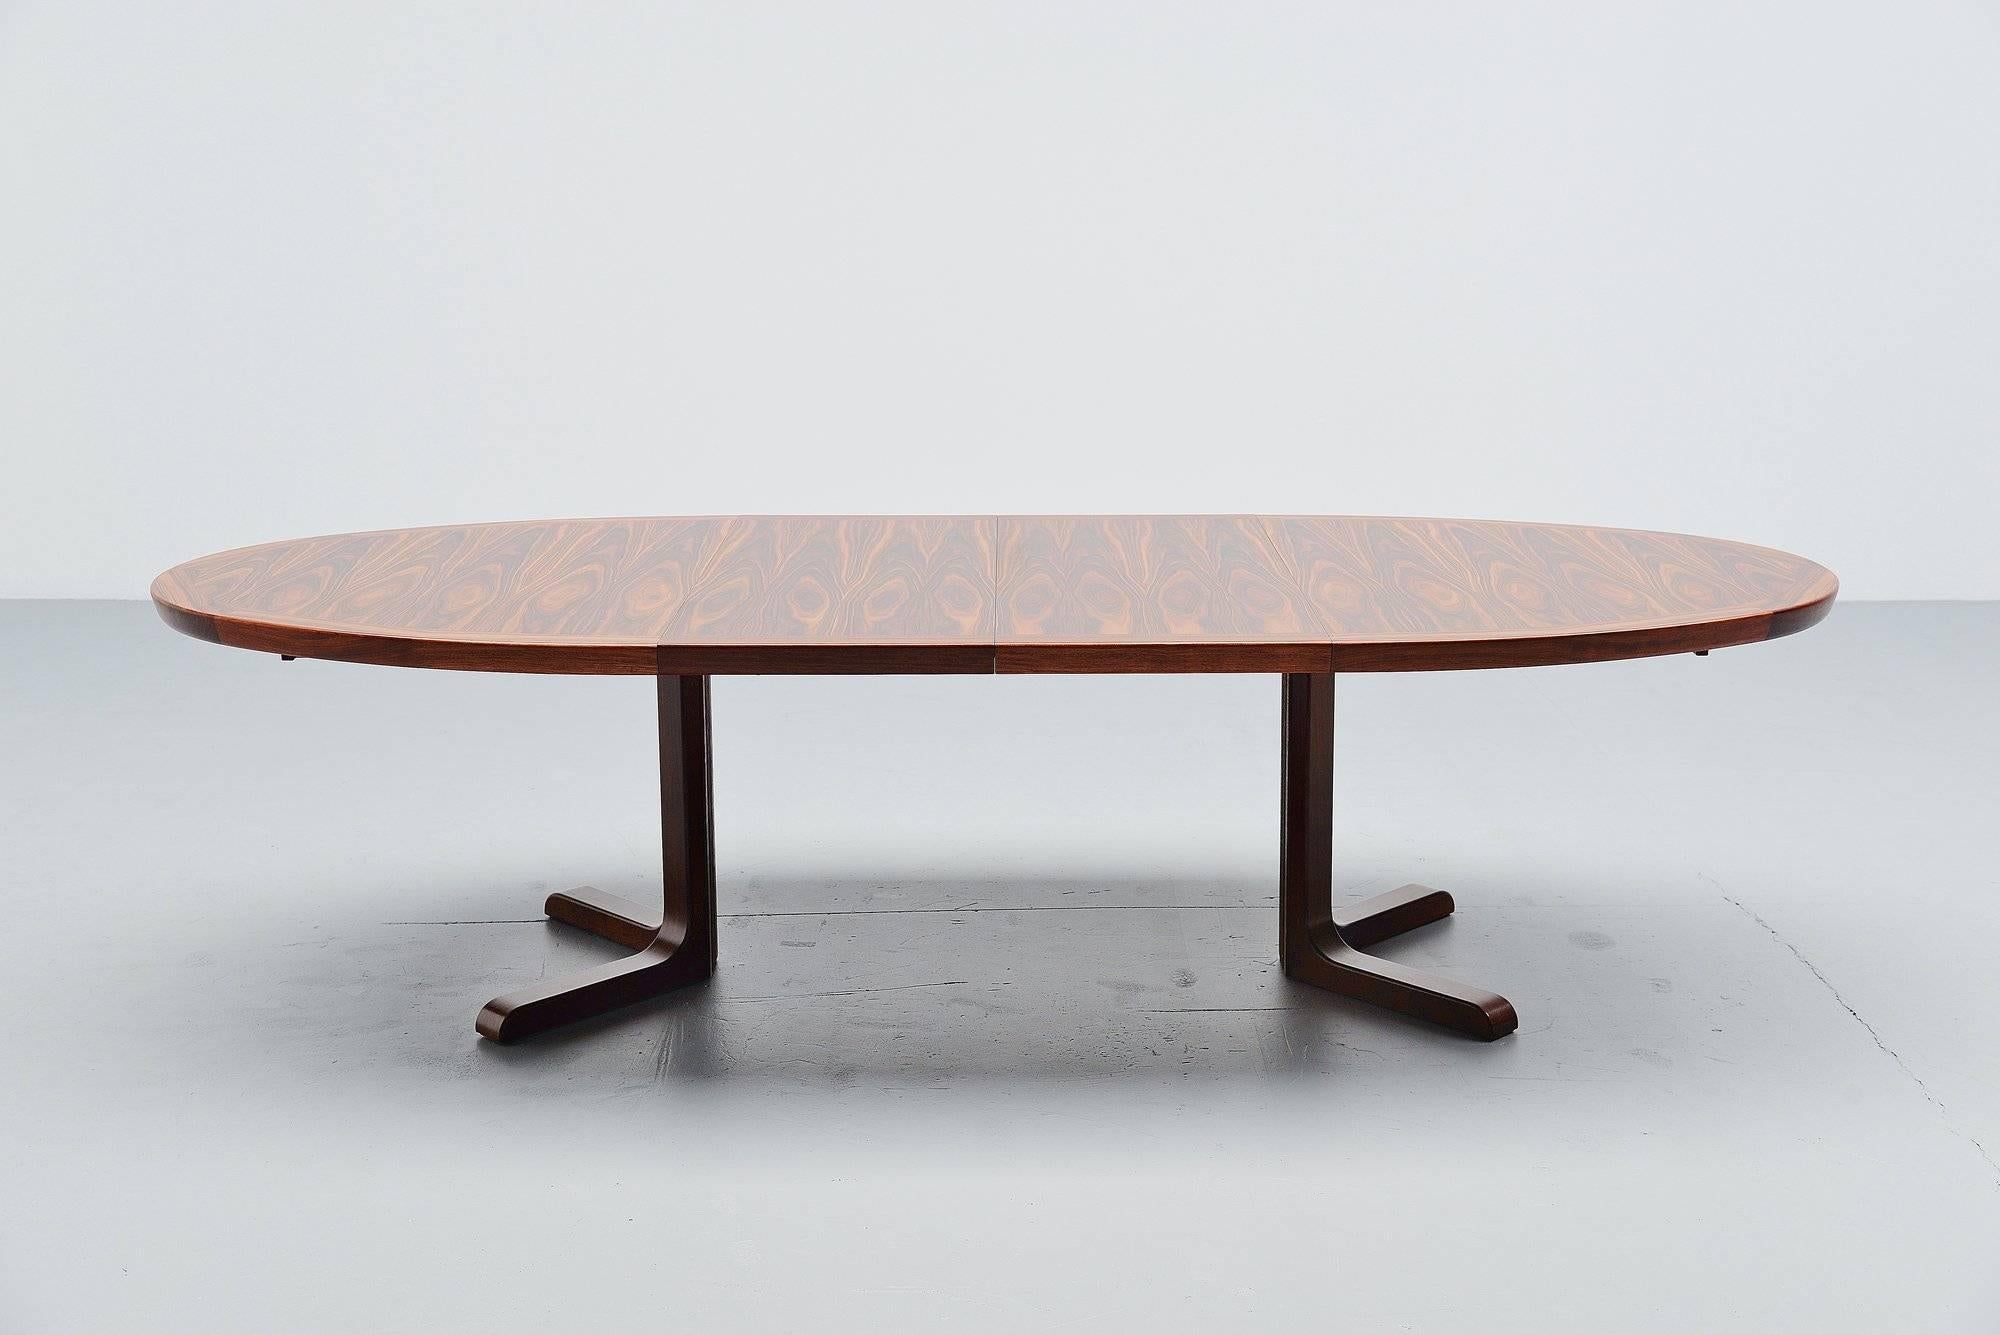 Large oval extendable dining or conference table made by unknown manufacturer, Denmark, 1960. This table is made of Rio rosewood and has an amazing grain to the wooden top. This table can be extended from 180 cm to 280 cm wide using the two